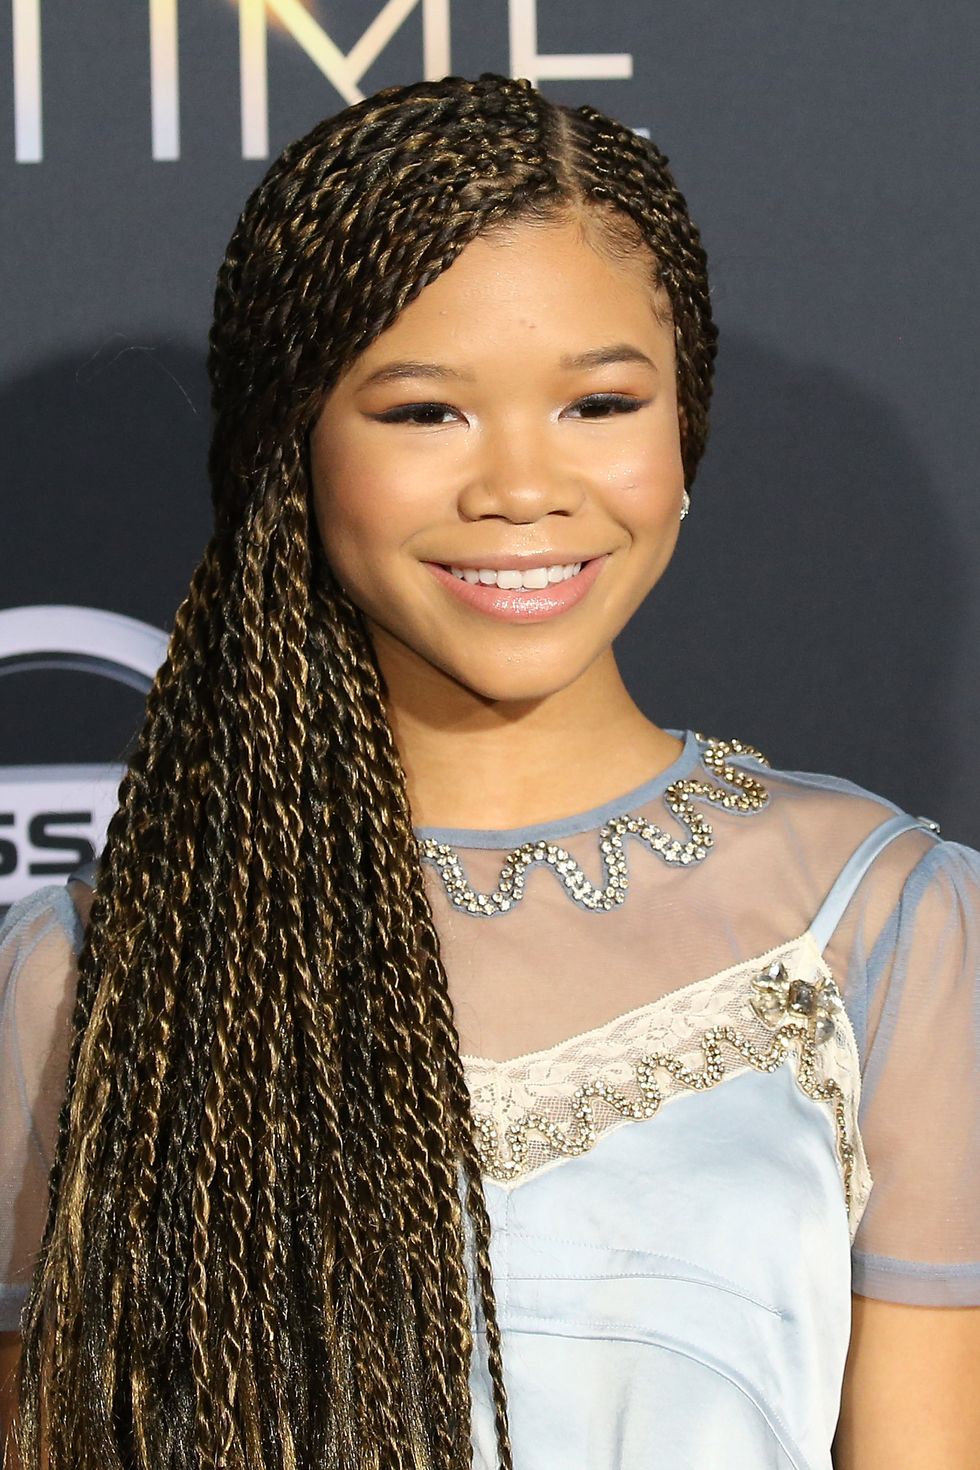 https://hips.hearstapps.com/hmg-prod/images/storm-reid-arrives-at-the-los-angeles-premiere-of-disneys-a-news-photo-1624389890.jpg?crop=0.78217xw:1xh;center,top&resize=980:*